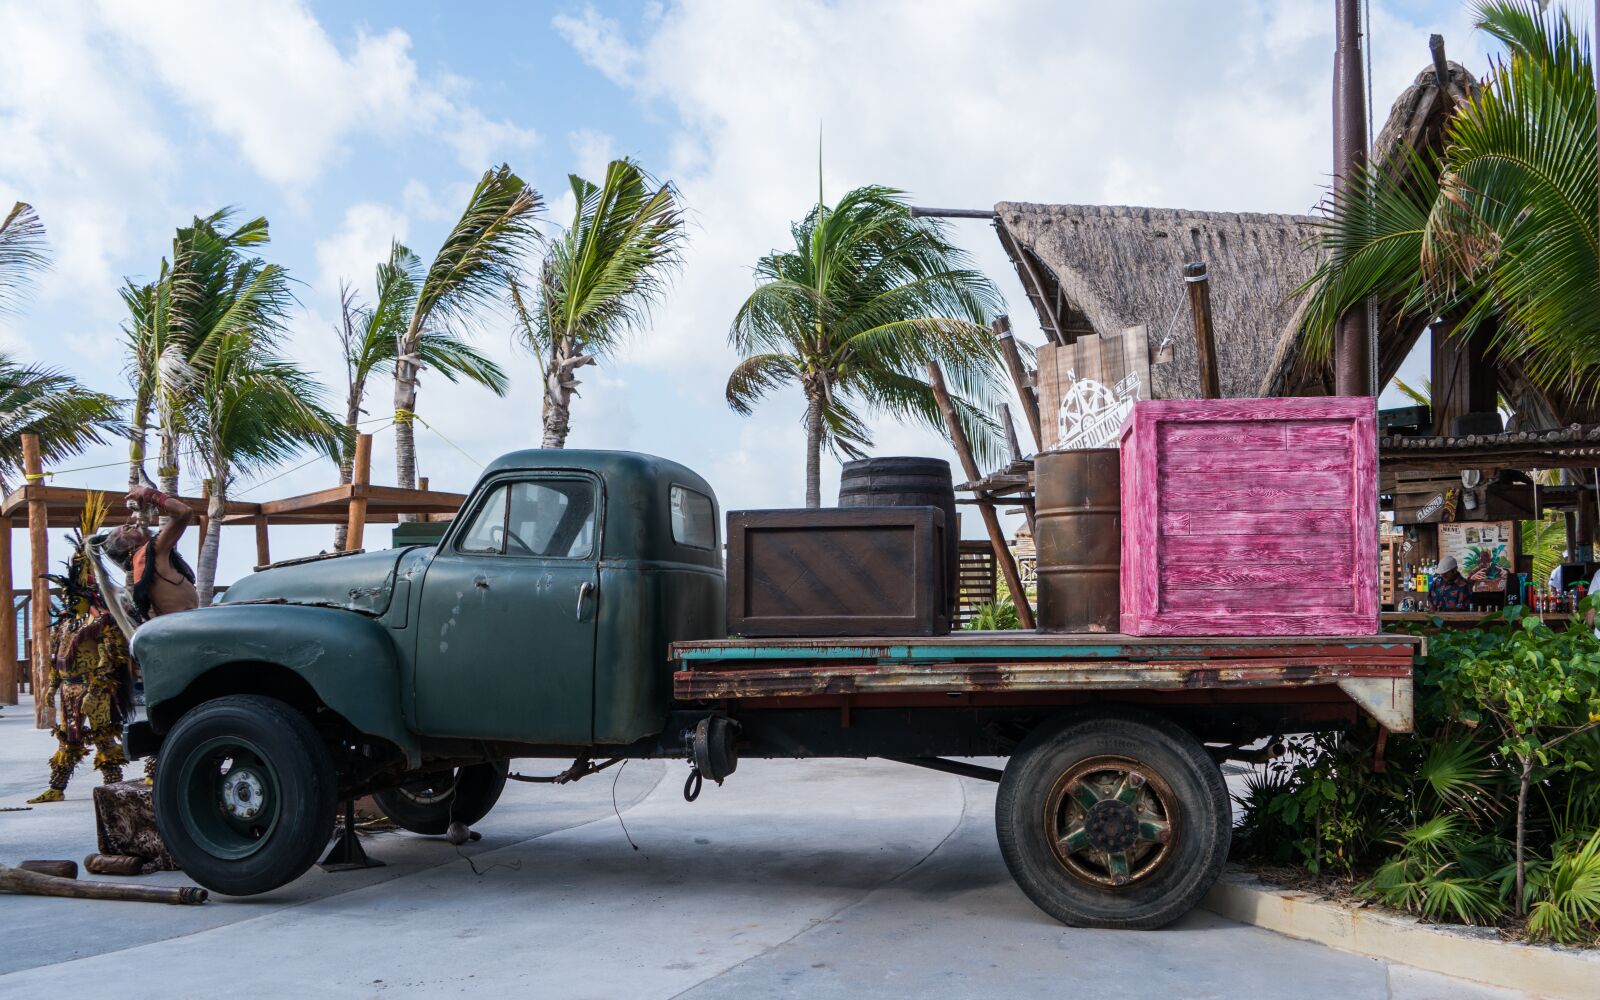 Sony a7R II sample photo. Antique truck, vehicle, car photography